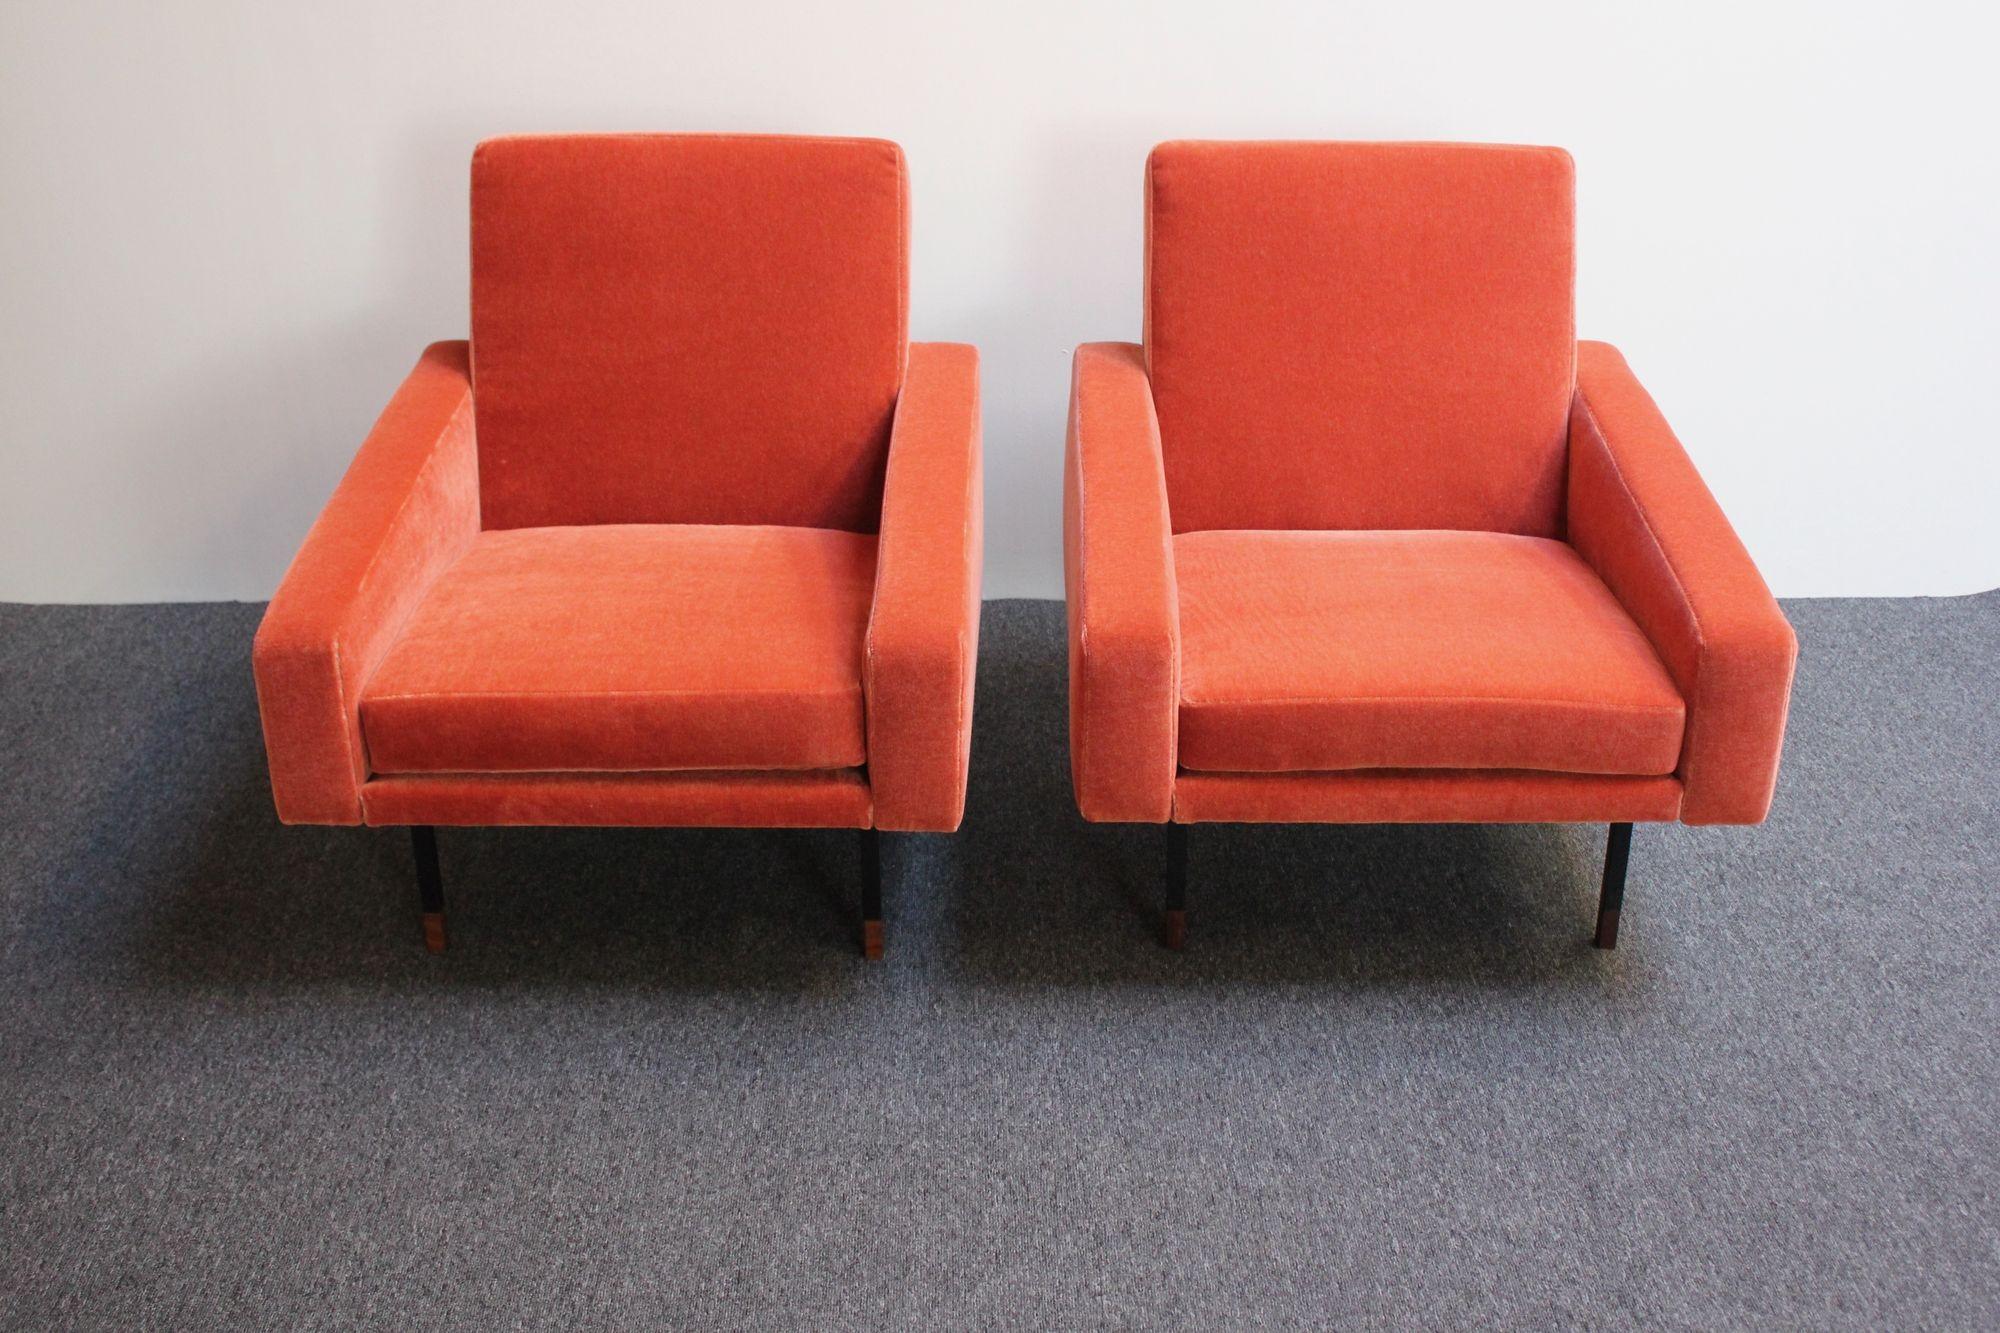 Pair of Italian Modernist Metal and Mohair Lounge Chairs by Campo and Graffi For Sale 9